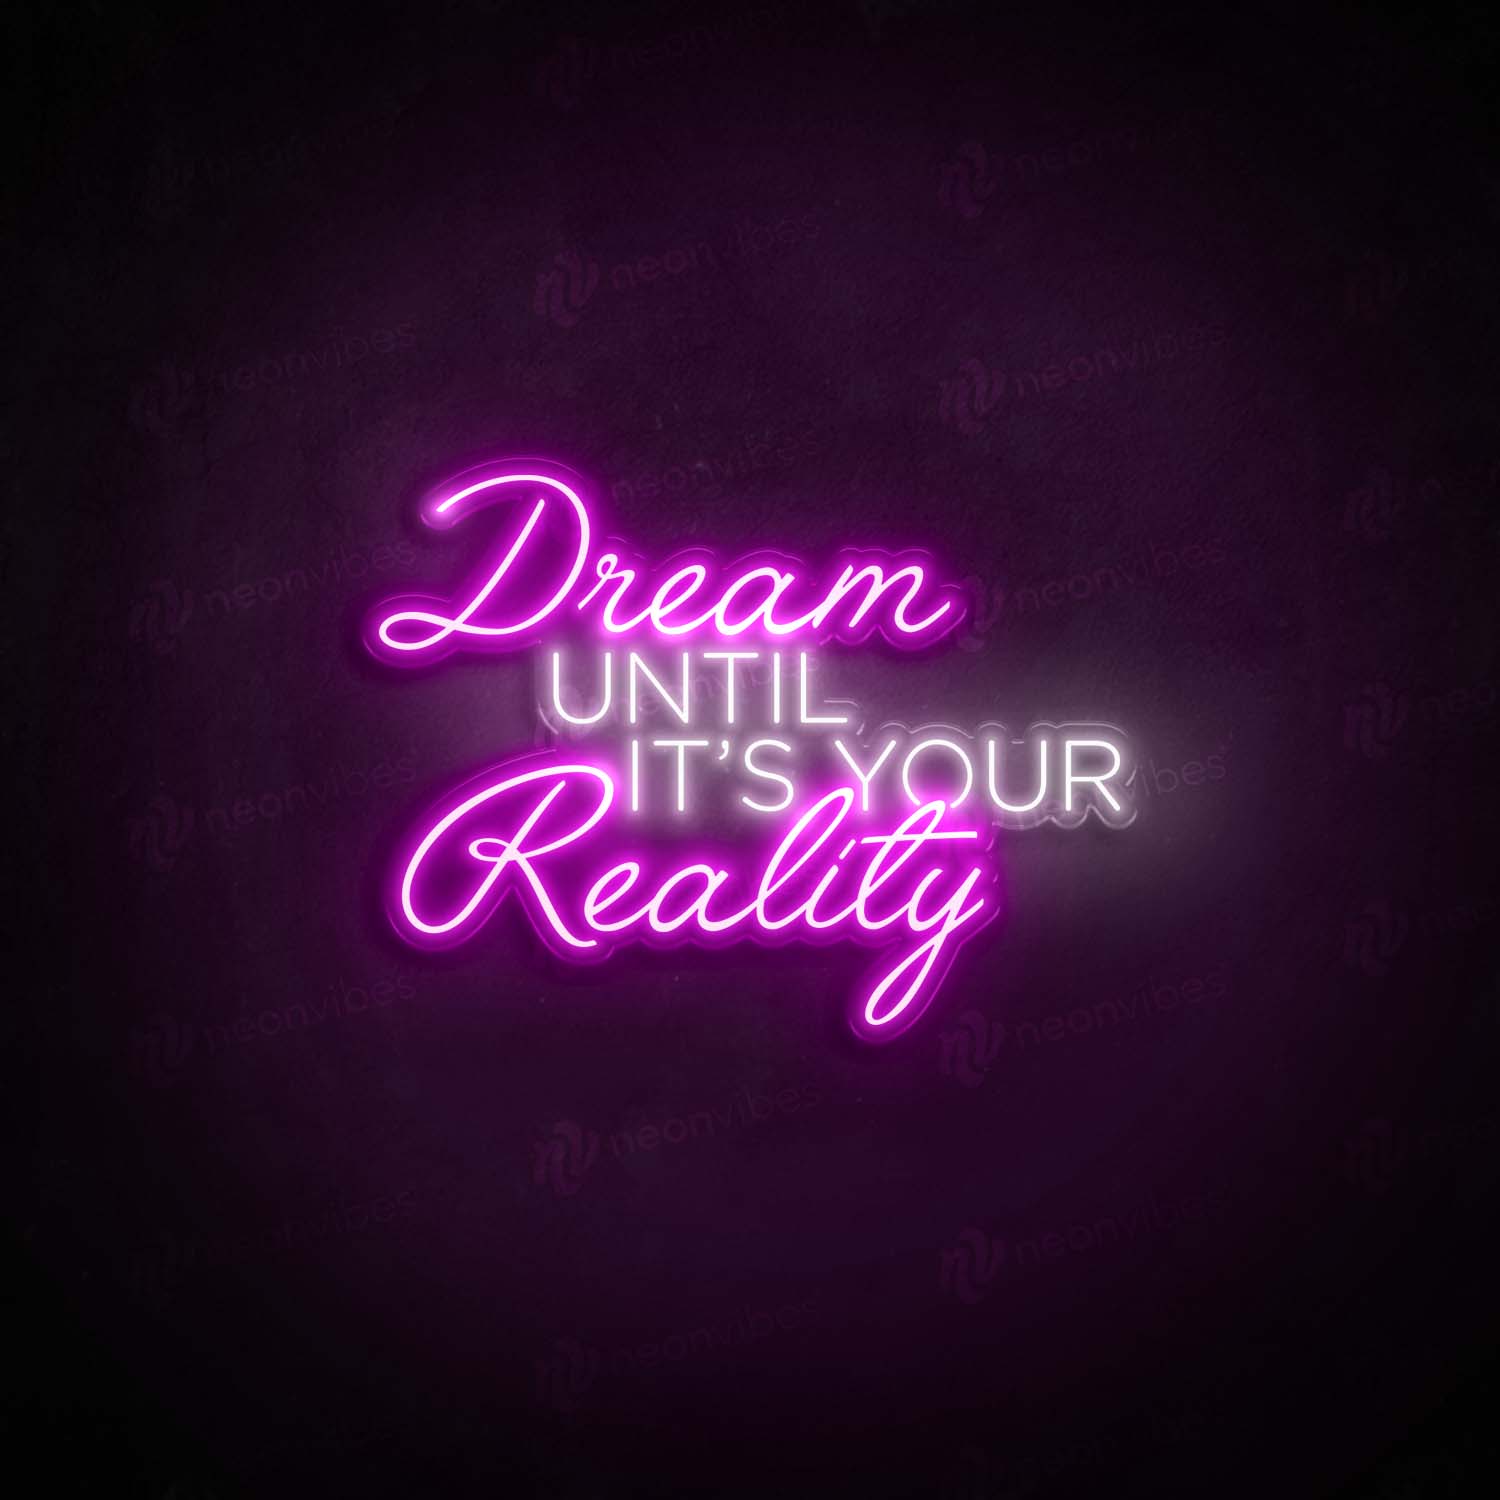 Dream Until Reality neon sign